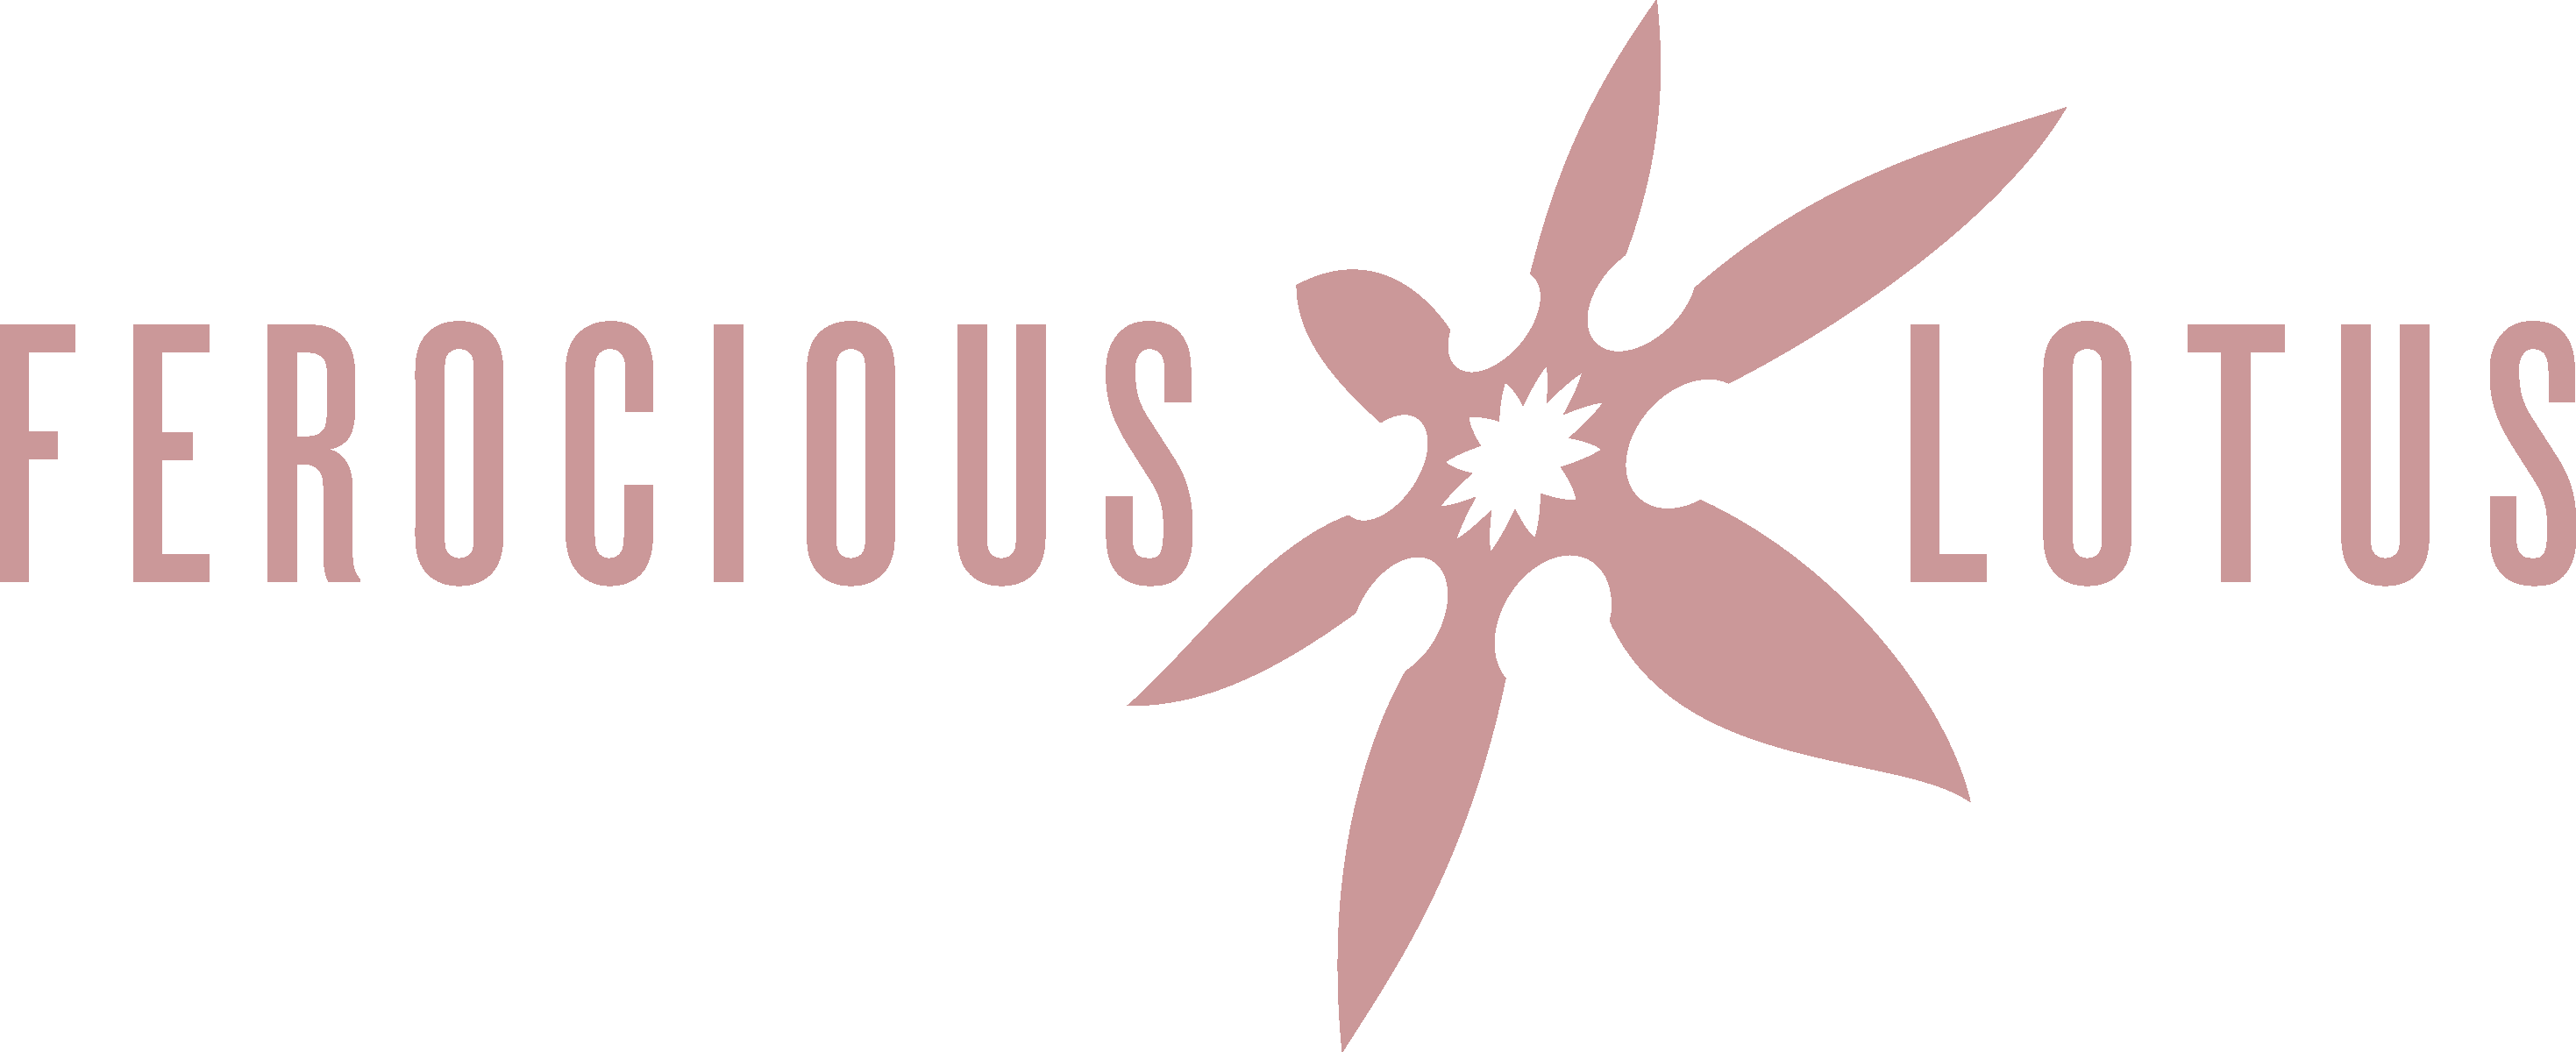 Logo for Ferocious Lotus Theater Company. The symbol is a ninja star in perspective, the blades of which are lotus leaves. The symbol is placed in between the words "Ferocious Lotus" set in all caps in a modern sans-serif typeface